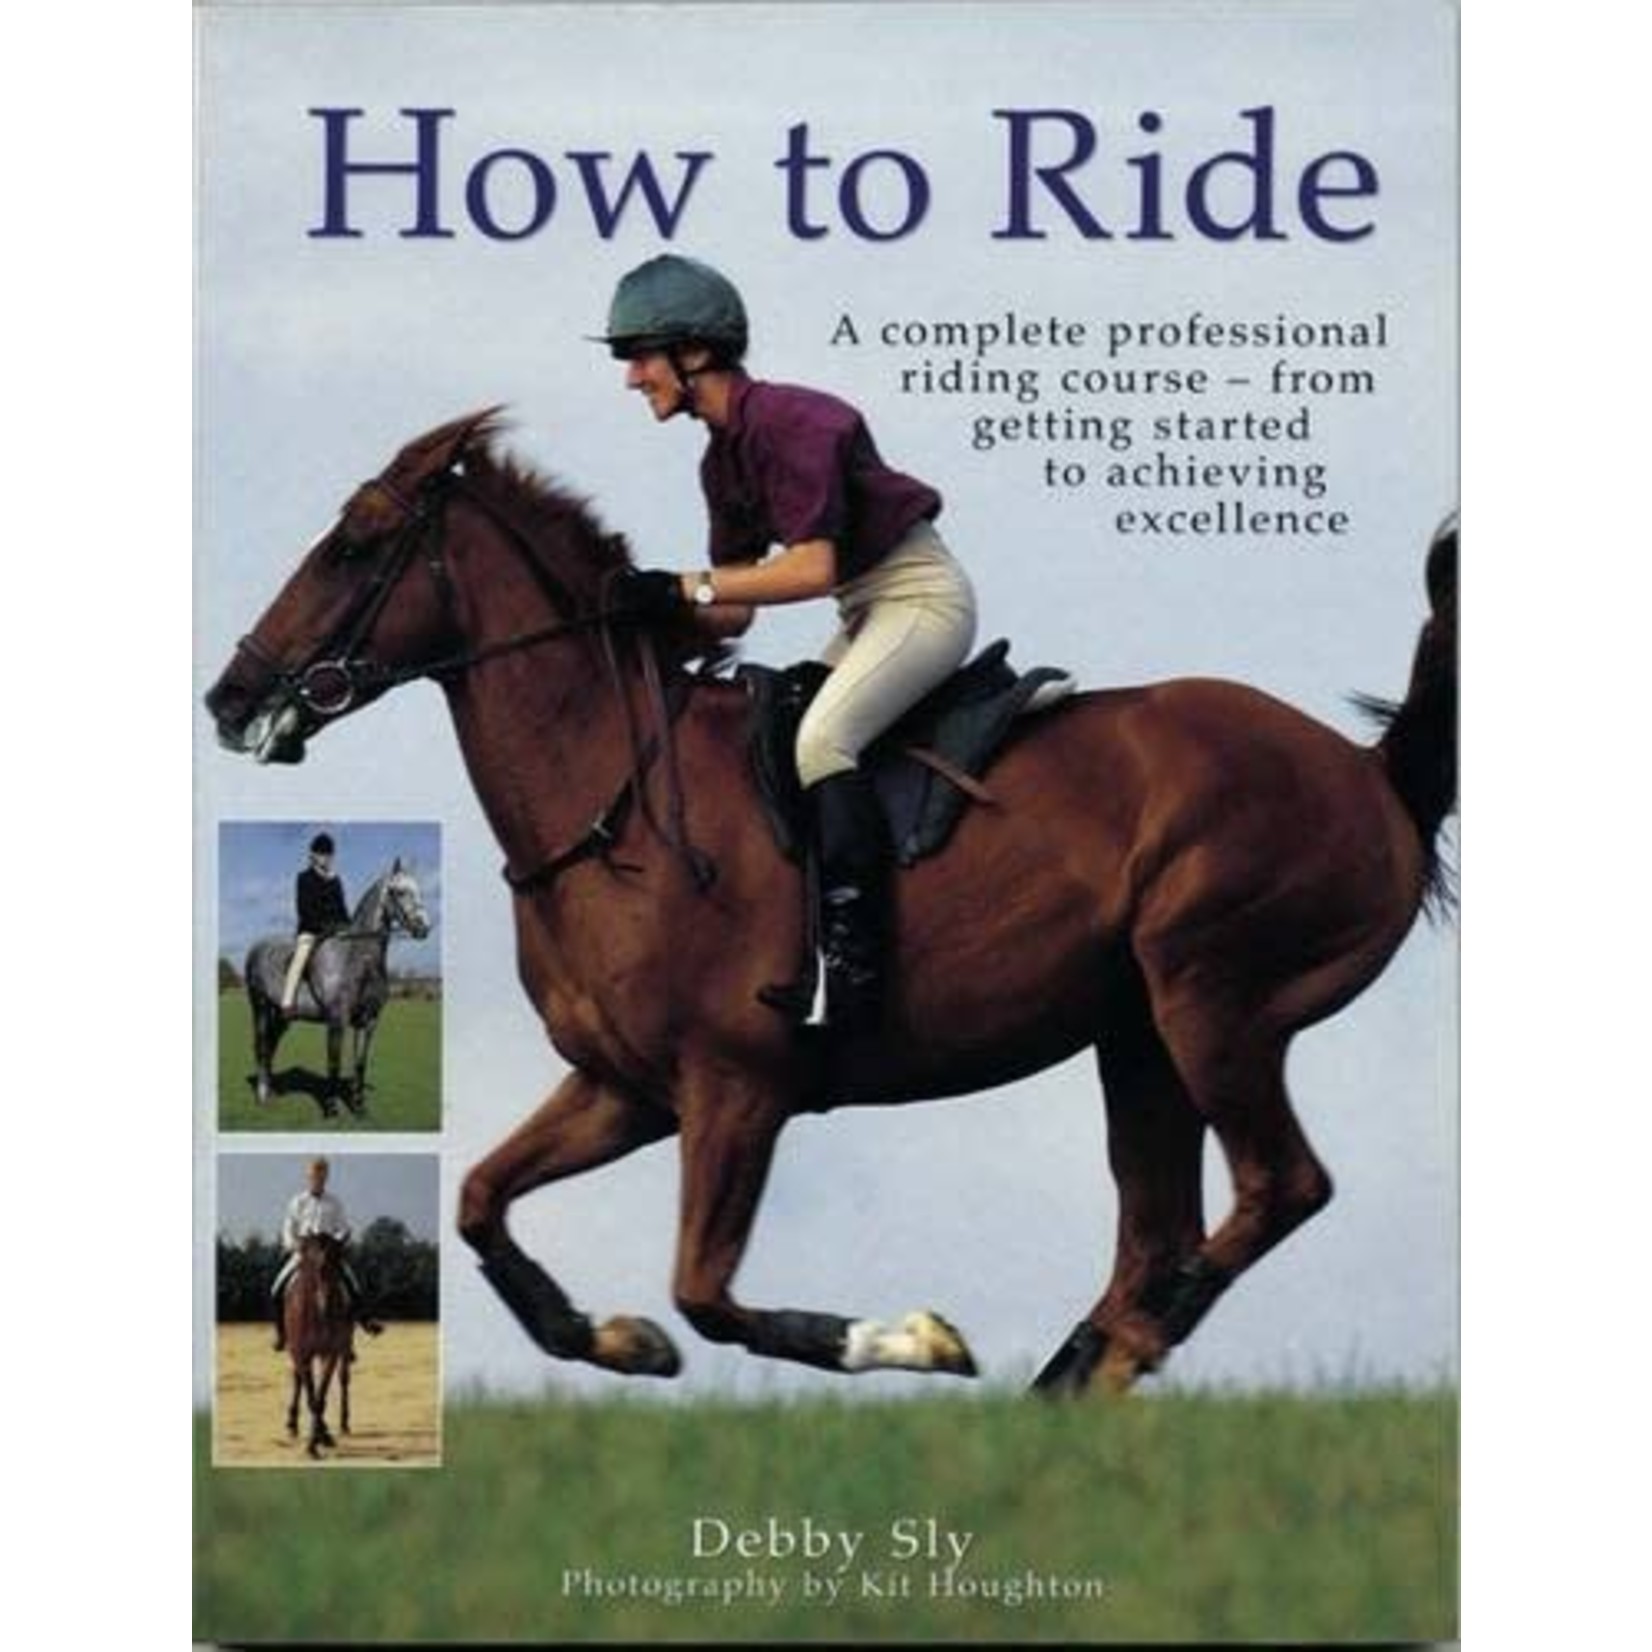 Debby Sly How to Ride (A complete professional riding course - from getting started to achieving excellence)